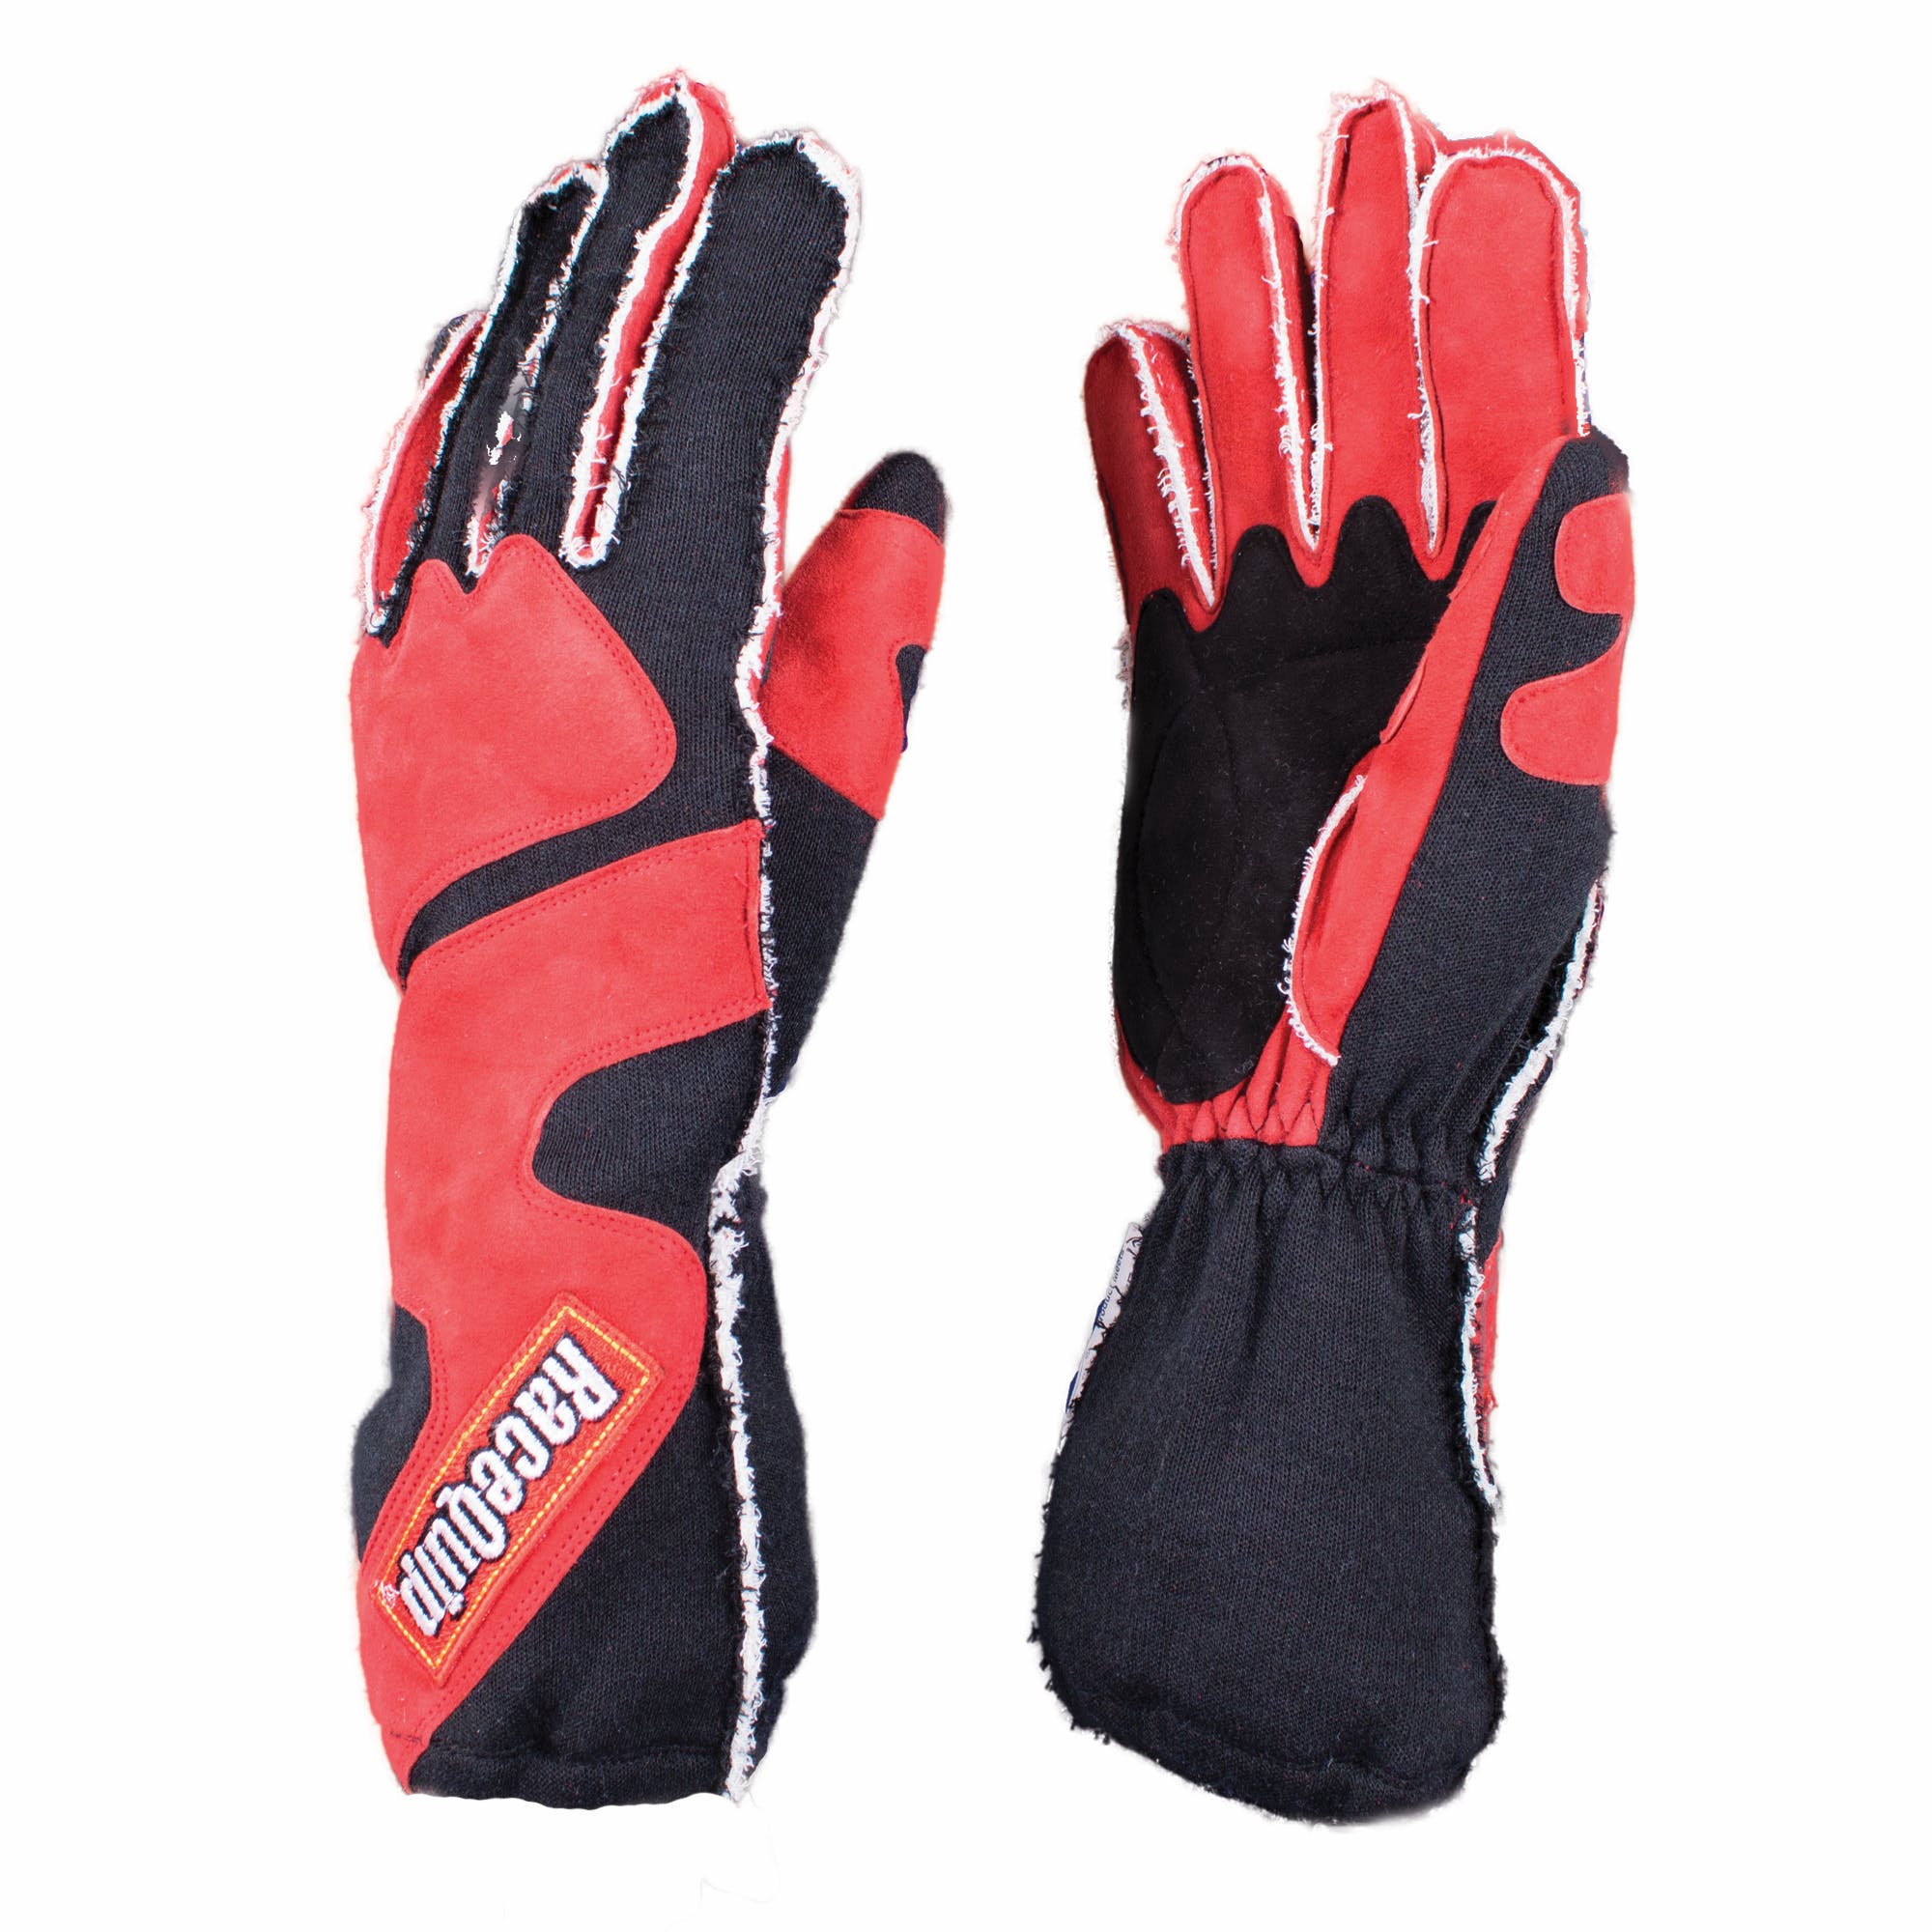 RaceQuip 356105 SFI-5 Angle-Cut Cuffed Racing Gloves (Red/Black, Large)